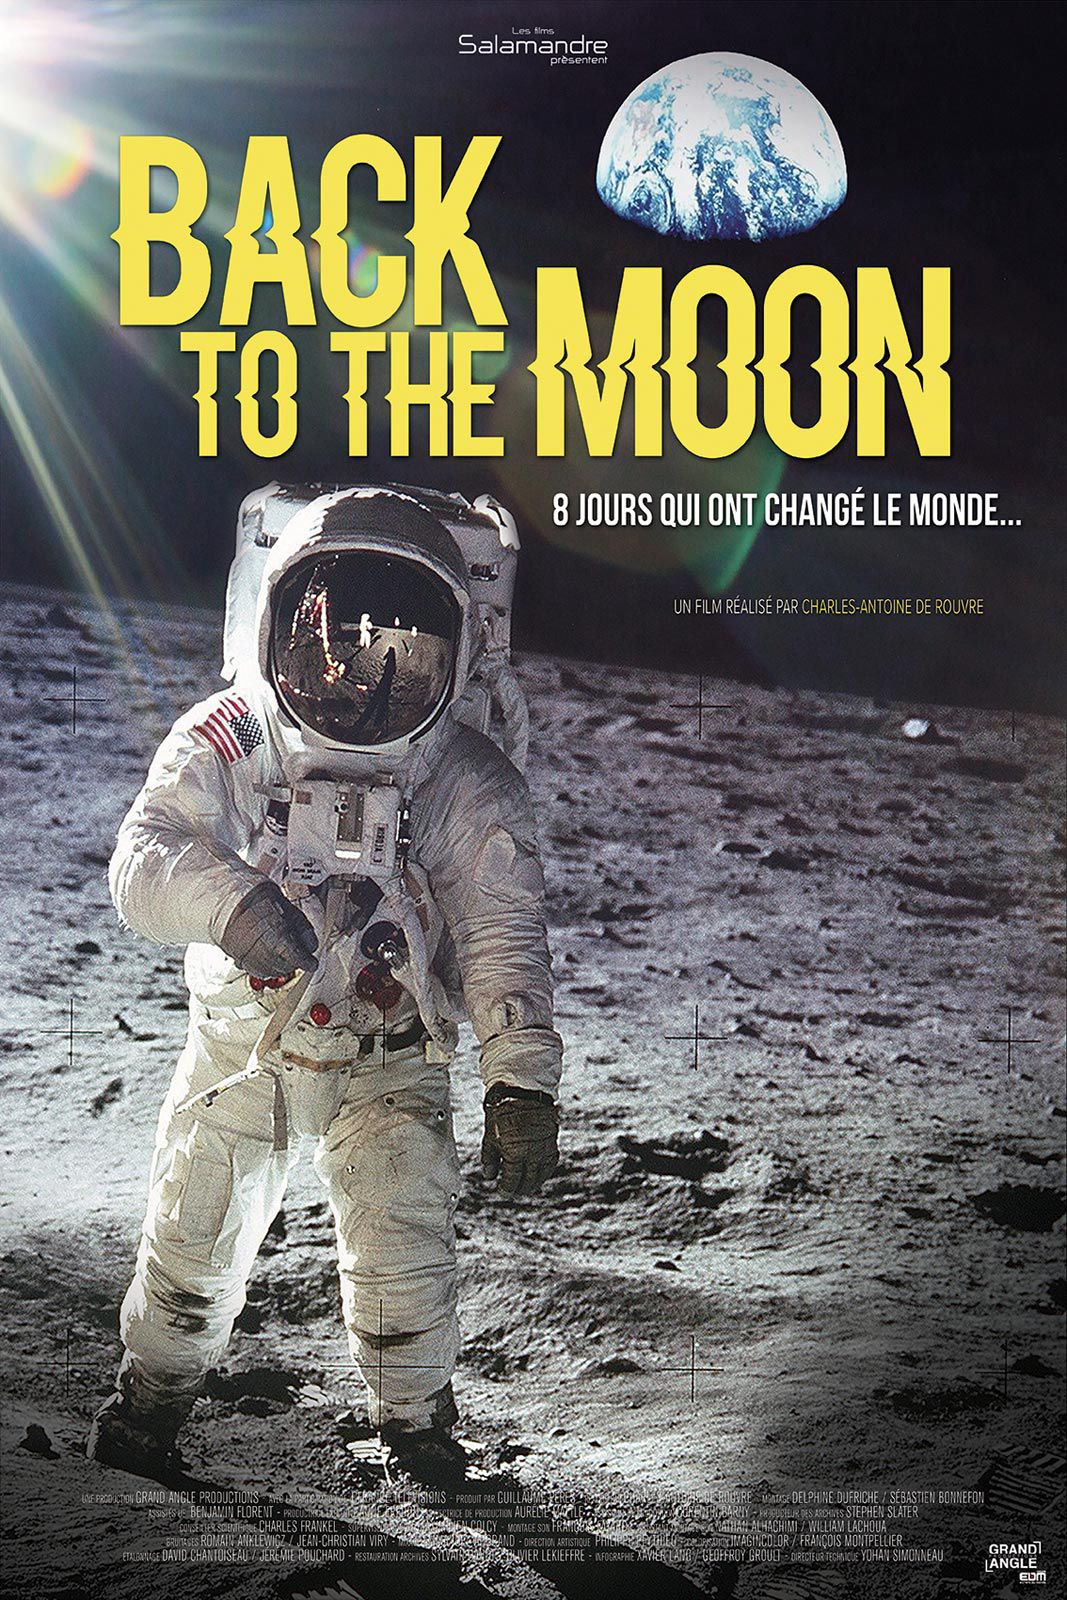 Back to the Moon - Documentaire (2019) streaming VF gratuit complet